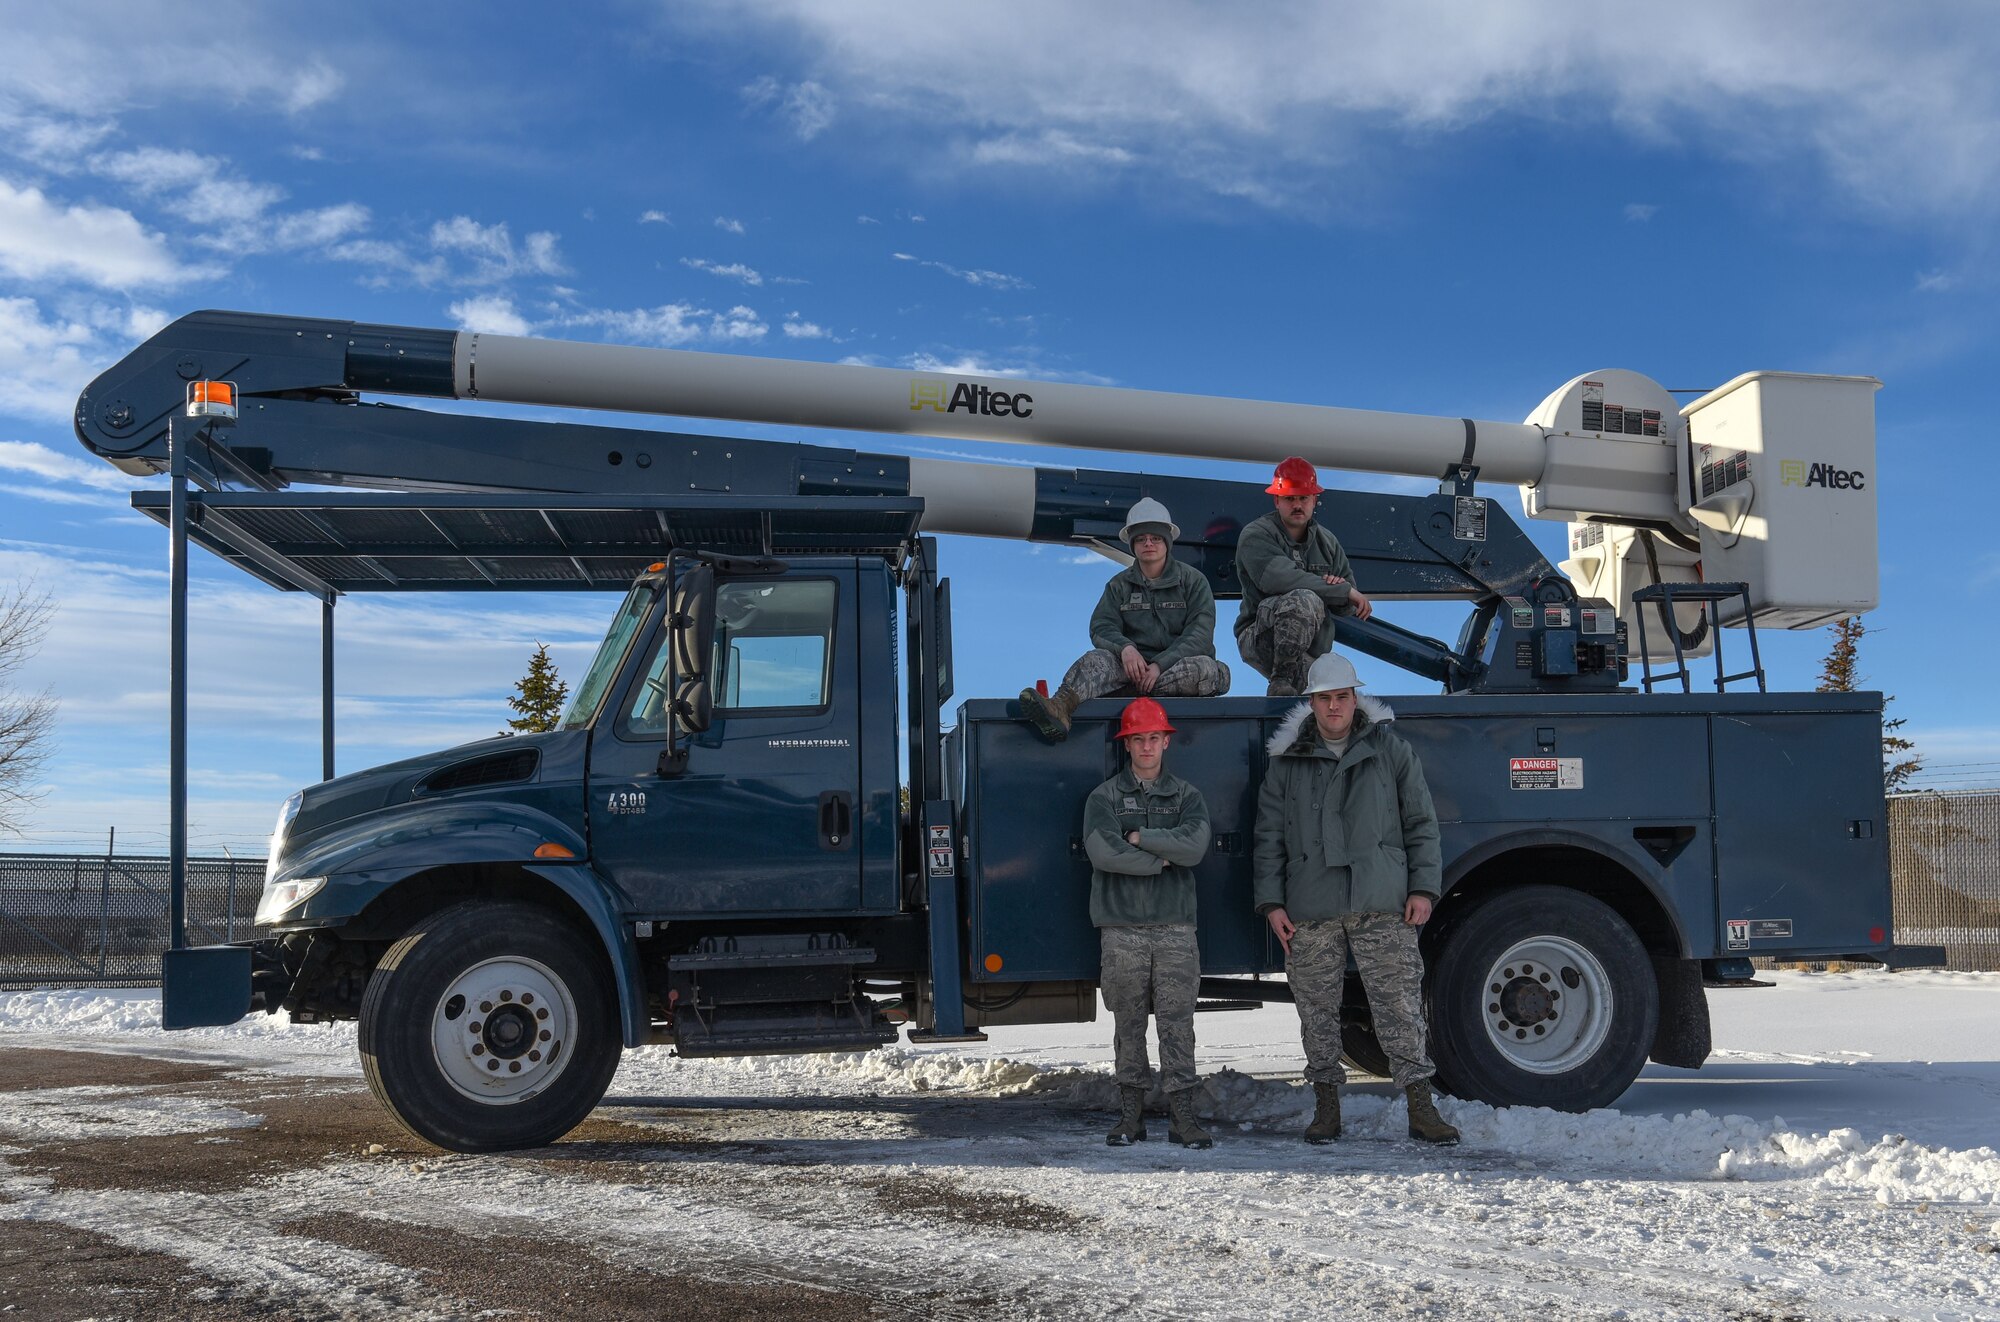 Airmen from the 90th Civil Engineer Squadron electrical shop pose for a photo Feb. 2, 2018, on F.E. Warren Air Force Base Wyo. Every single area on F.E. Warren is touched by the electrical shop, ensuring the mission runs without interruption day in and day out. (U.S. Air Force photo by Airman 1st Class Braydon Williams)